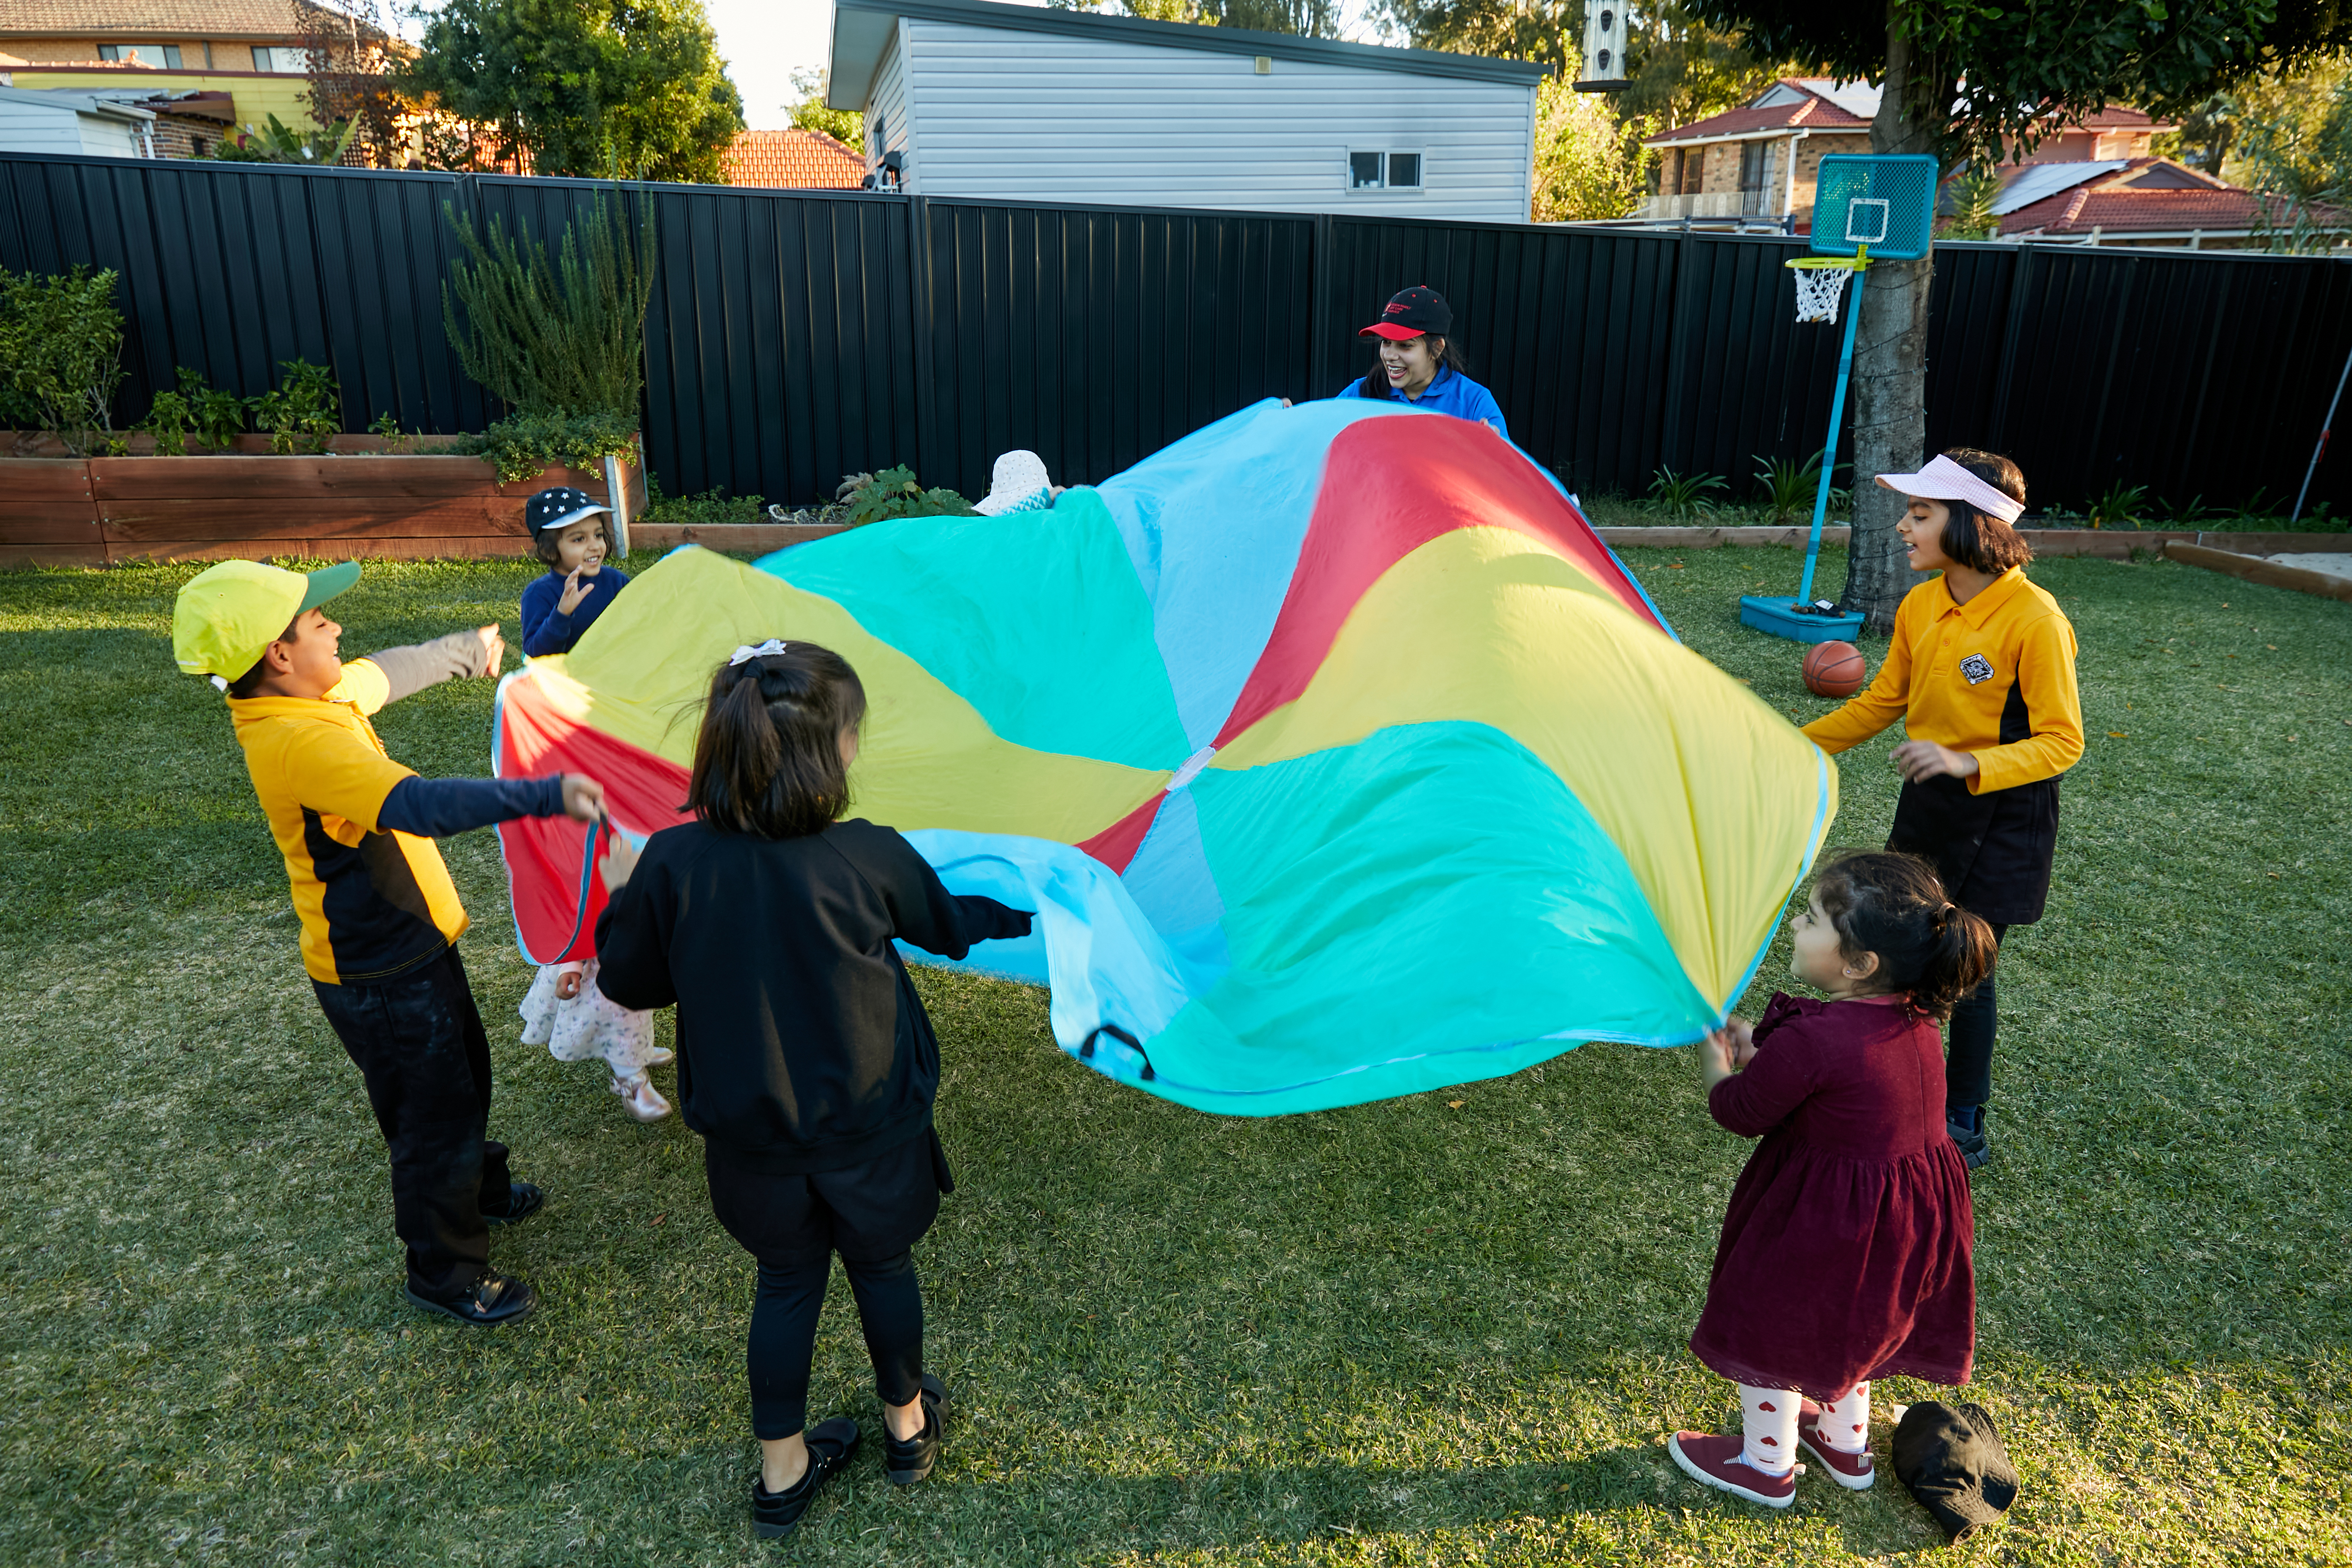 A group of children standing in a circle, holding a parachute as part of a game